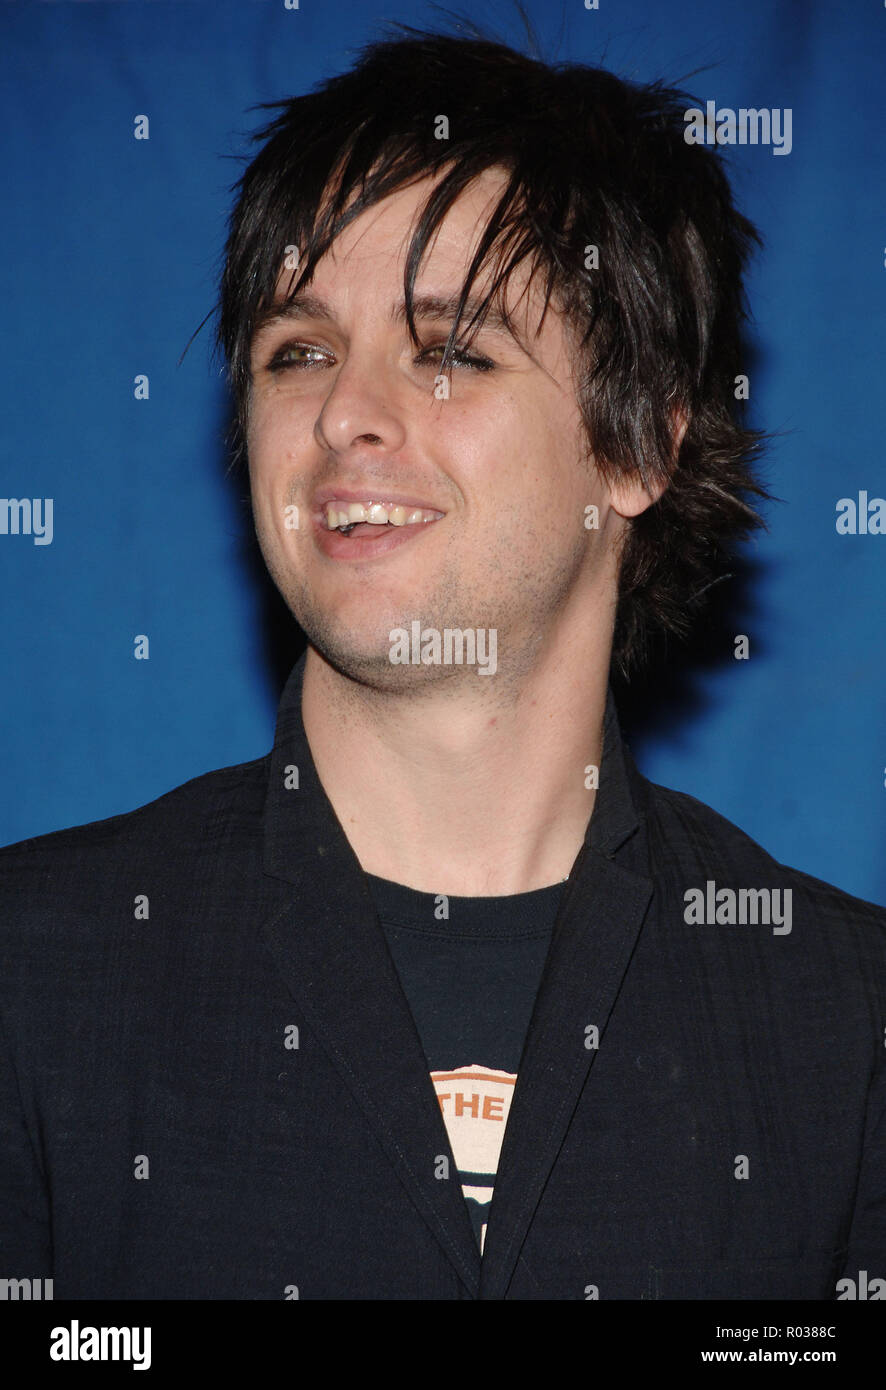 Billie Joe Armstrong (Green Day) backstage at the 32nd People Choice Awards at the Shrine Auditorium in Los Angeles. January 10, 2006.11 ArmstrongBillieJoe  Red Carpet Event, Vertical, USA, Film Industry, Celebrities,  Photography, Bestof, Arts Culture and Entertainment, Topix Celebrities fashion /  Vertical, Best of, Event in Hollywood Life - California,  Red Carpet and backstage, USA, Film Industry, Celebrities,  movie celebrities, TV celebrities, Music celebrities, Photography, Bestof, Arts Culture and Entertainment,  Topix, headshot, vertical, one person,, from the year , 2005, inquiry tsu Stock Photo